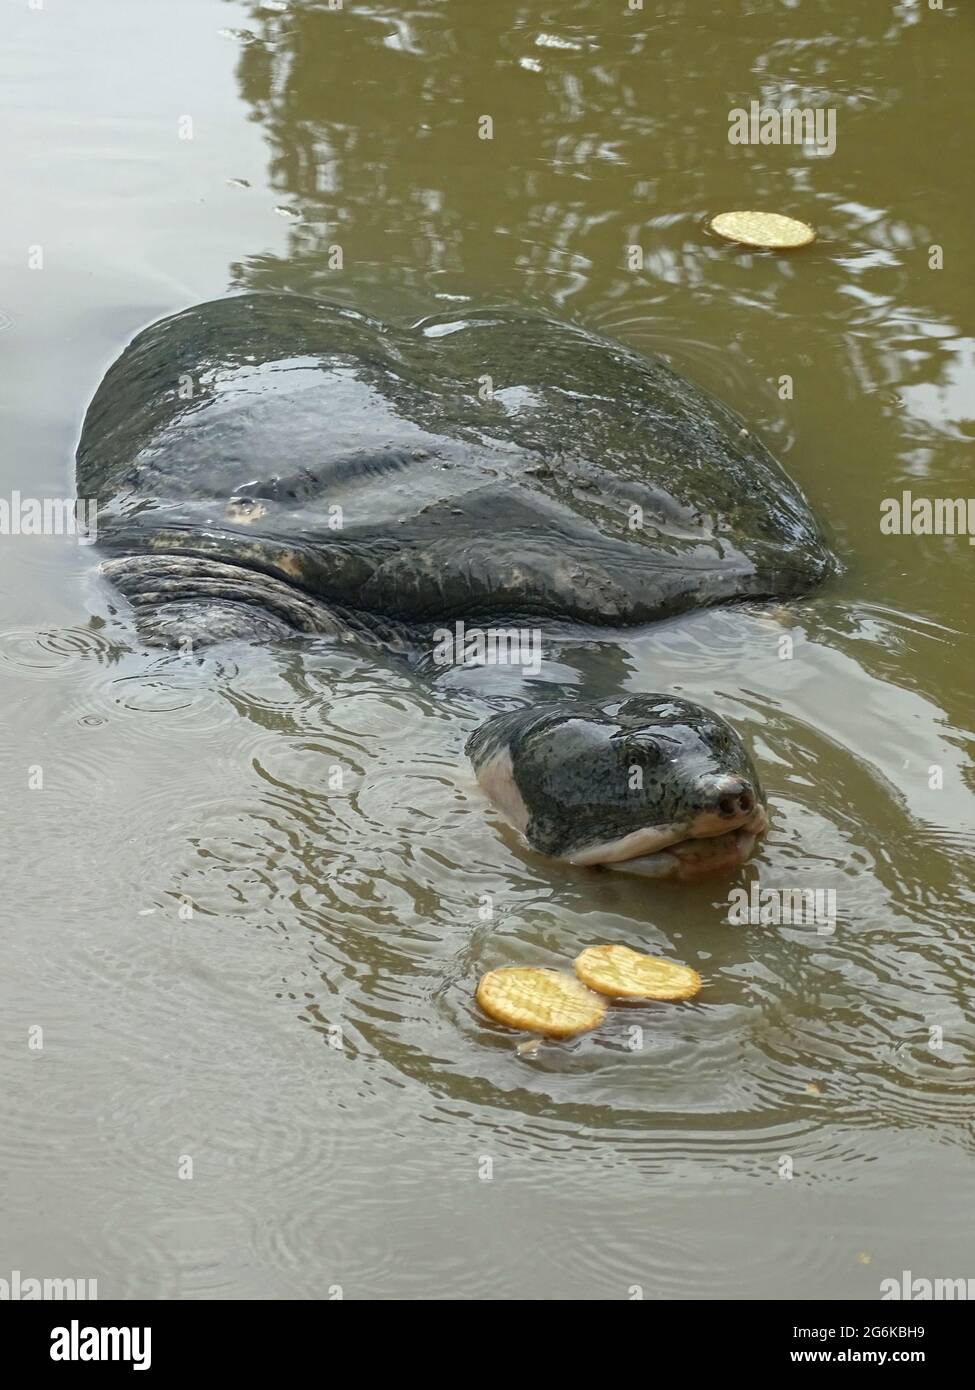 The black softshell turtle or Bostami turtle, Nilssonia nigricans Assam, India. Freshwater turtle found in India (Assam) and Bangladesh Stock Photo